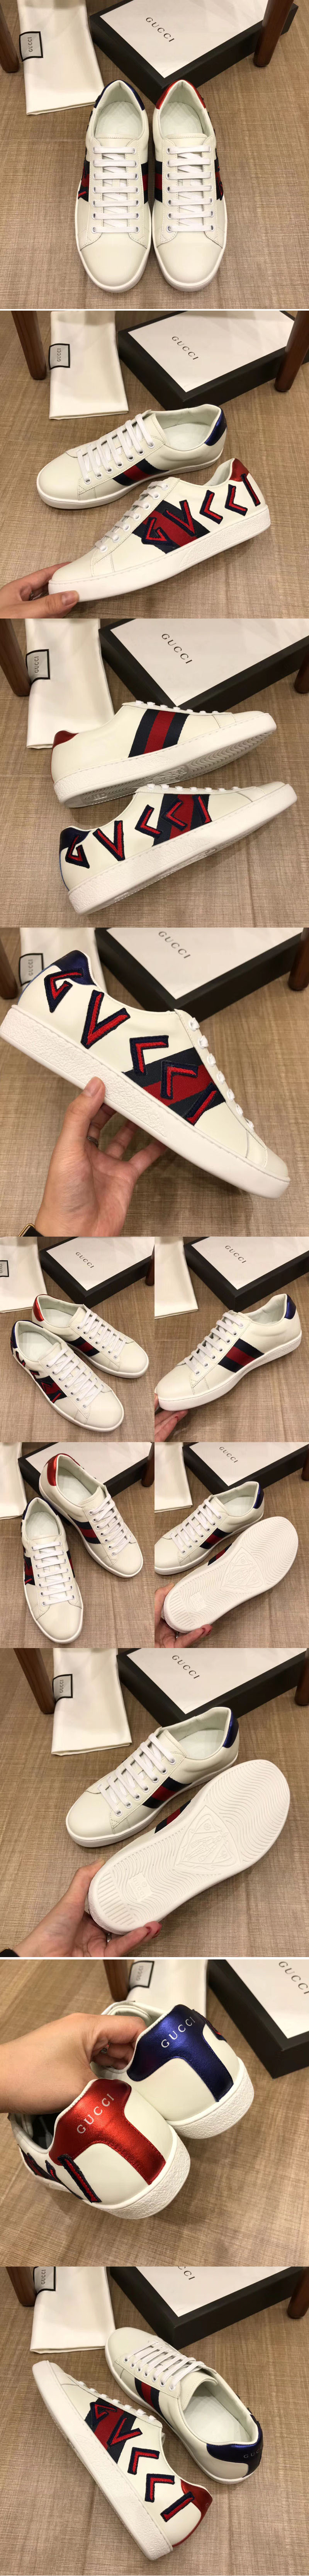 Replica Gucci Ace embroidered sneaker White Leather Mens and Women Size